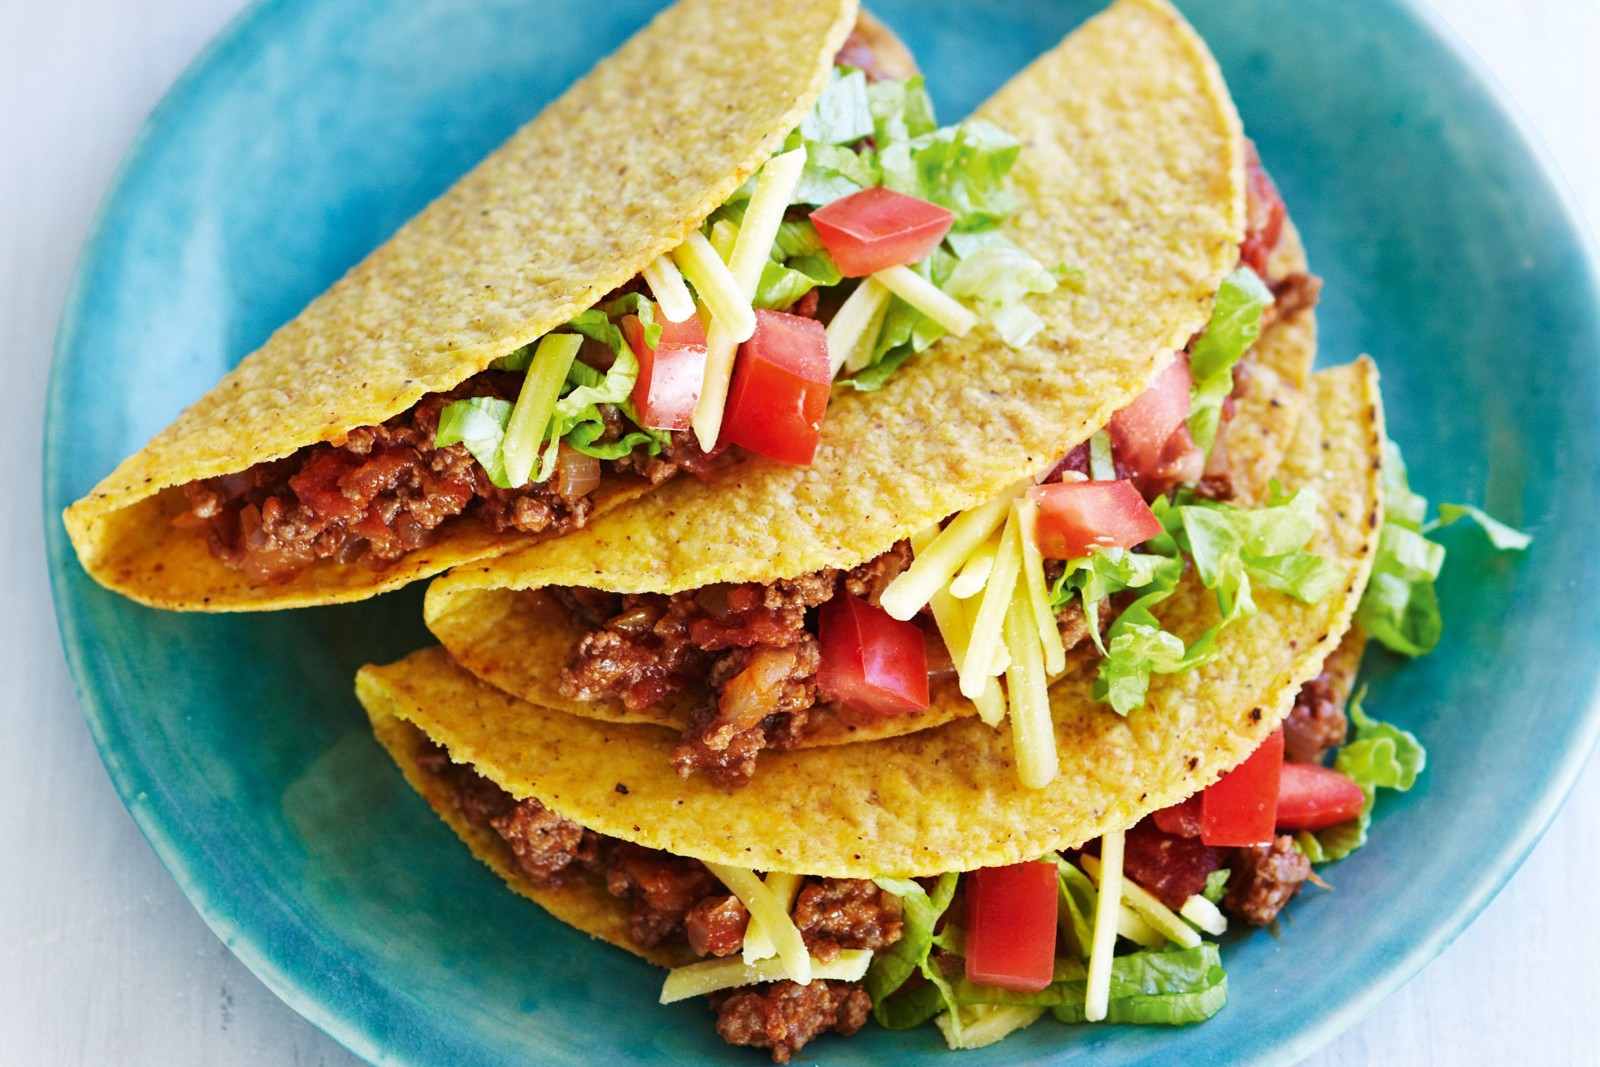 aussie-style-beef-and-salad-tacos-86525-1